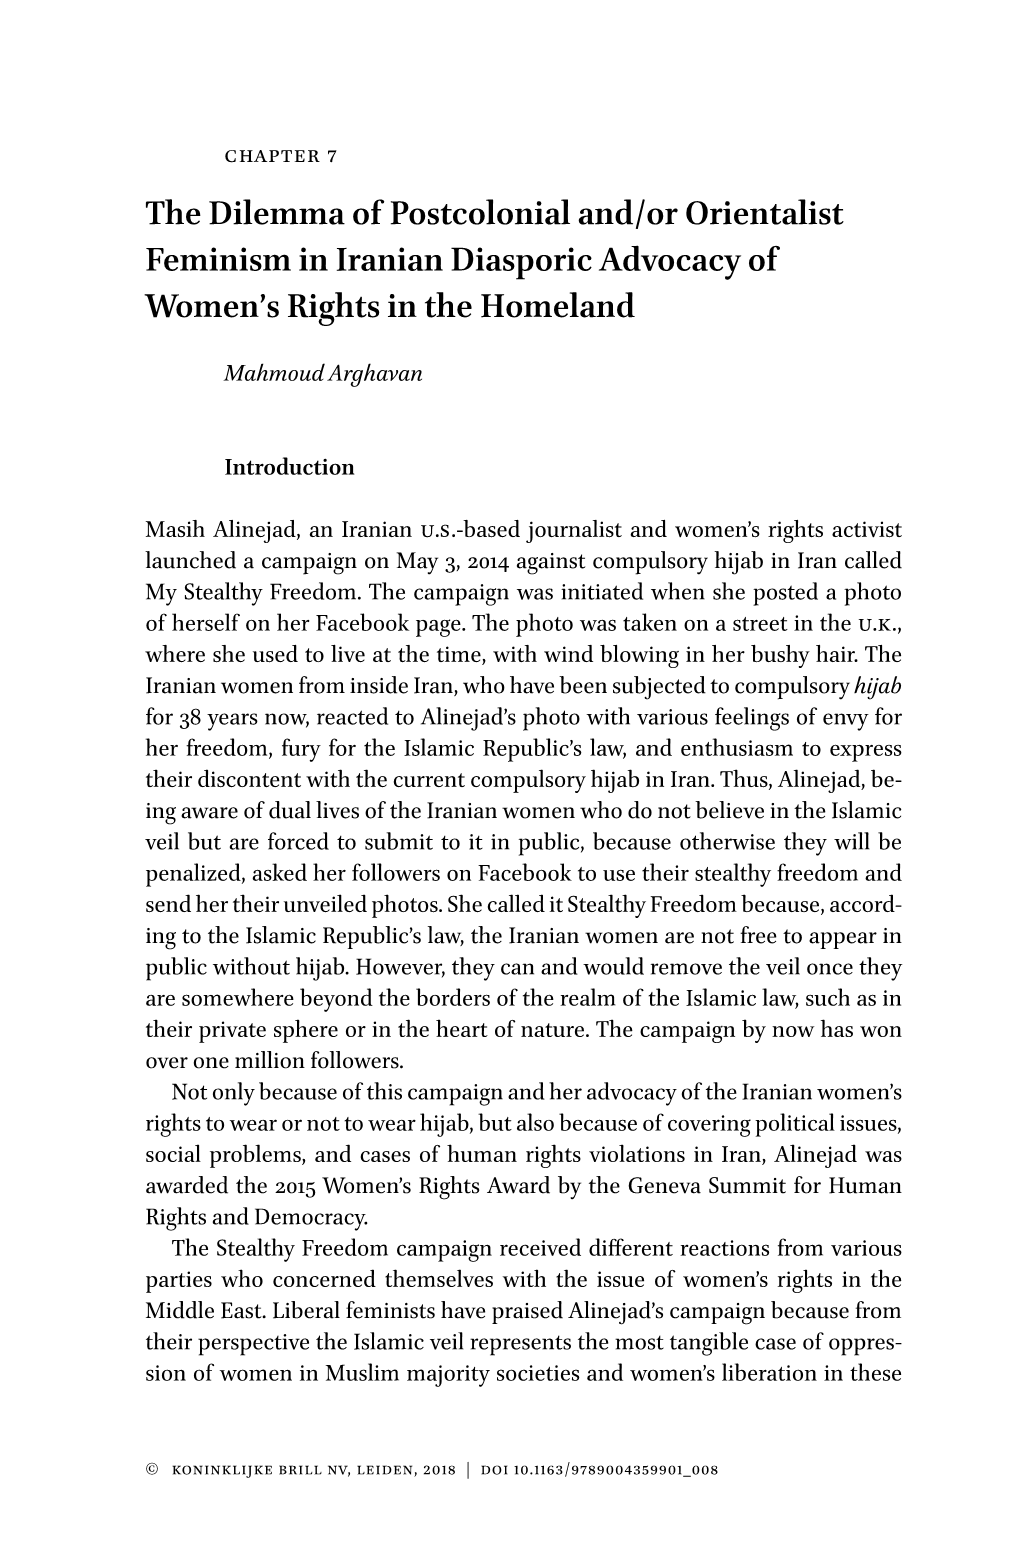 The Dilemma of Postcolonial And/Or Orientalist Feminism in Iranian Diasporic Advocacy of Womenʼs Rights in the Homeland